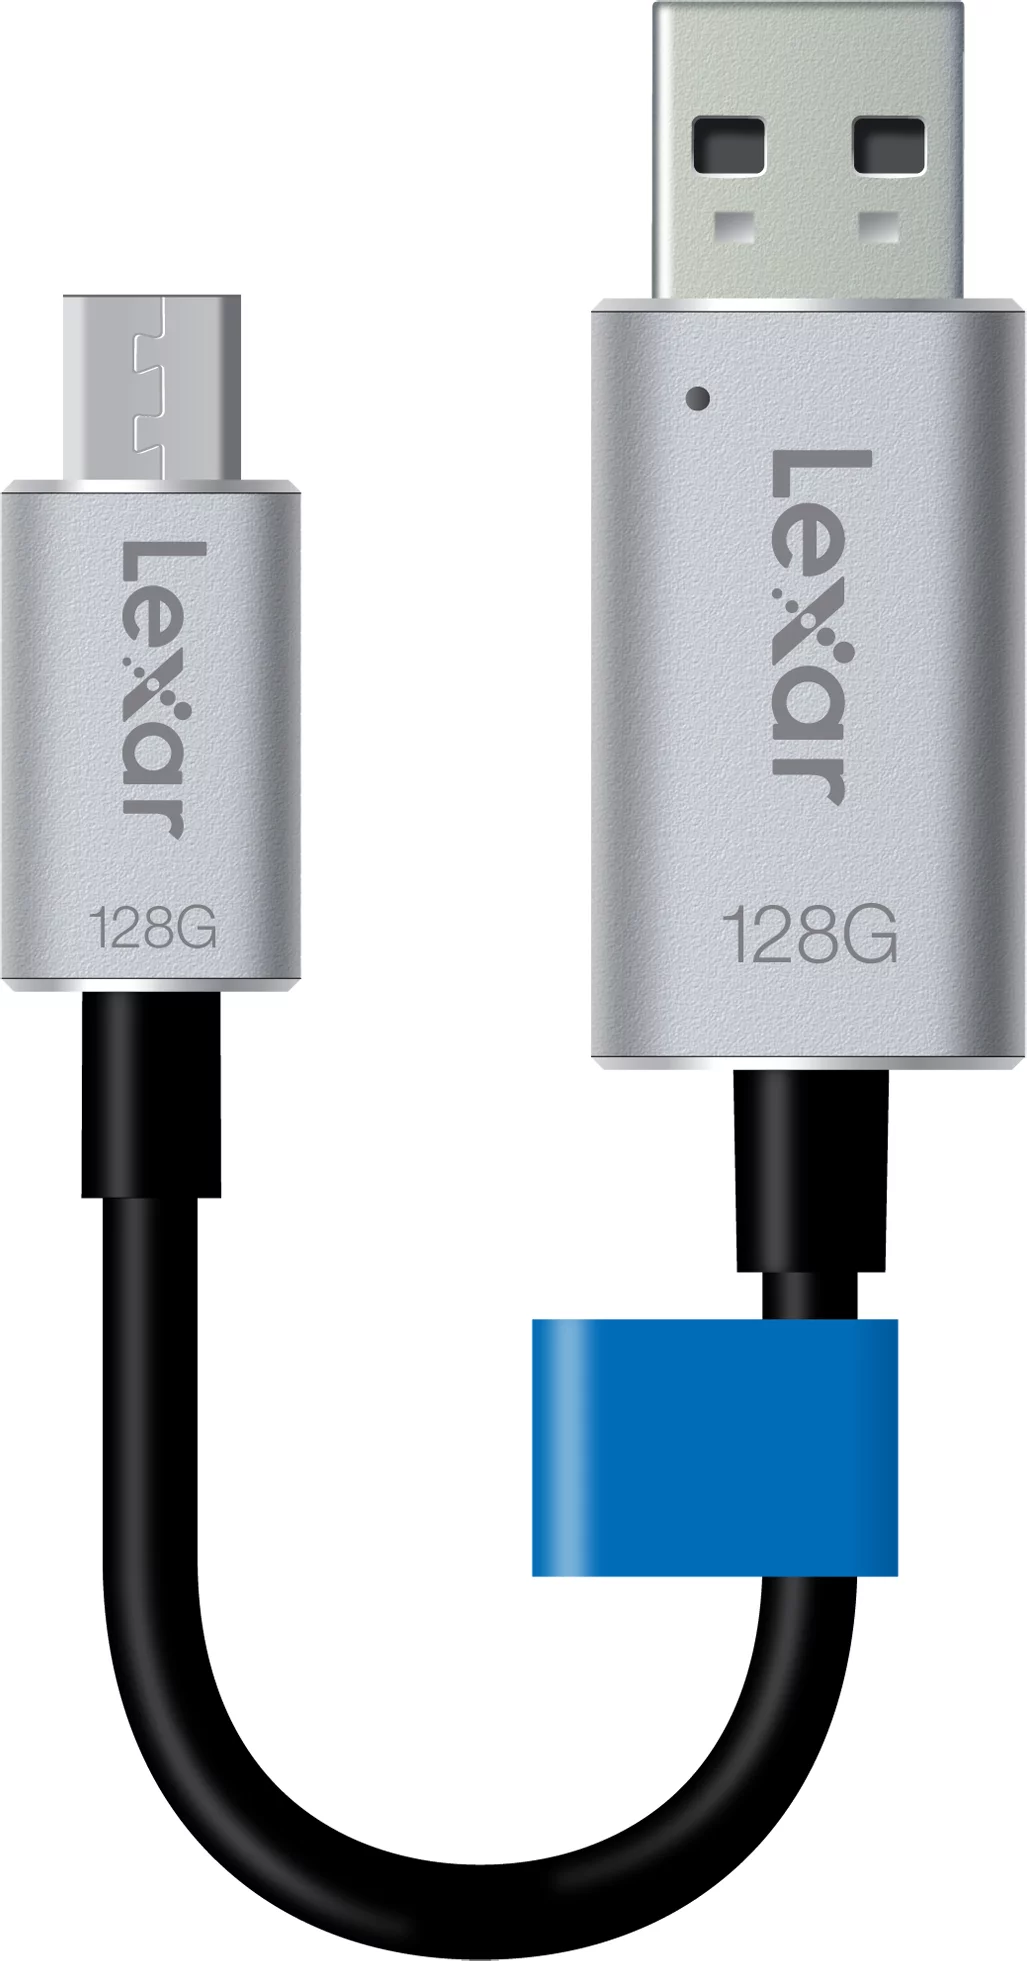 lexar jumpdrive c20m 128gb prod image - for some reason we don't have an alt tag here